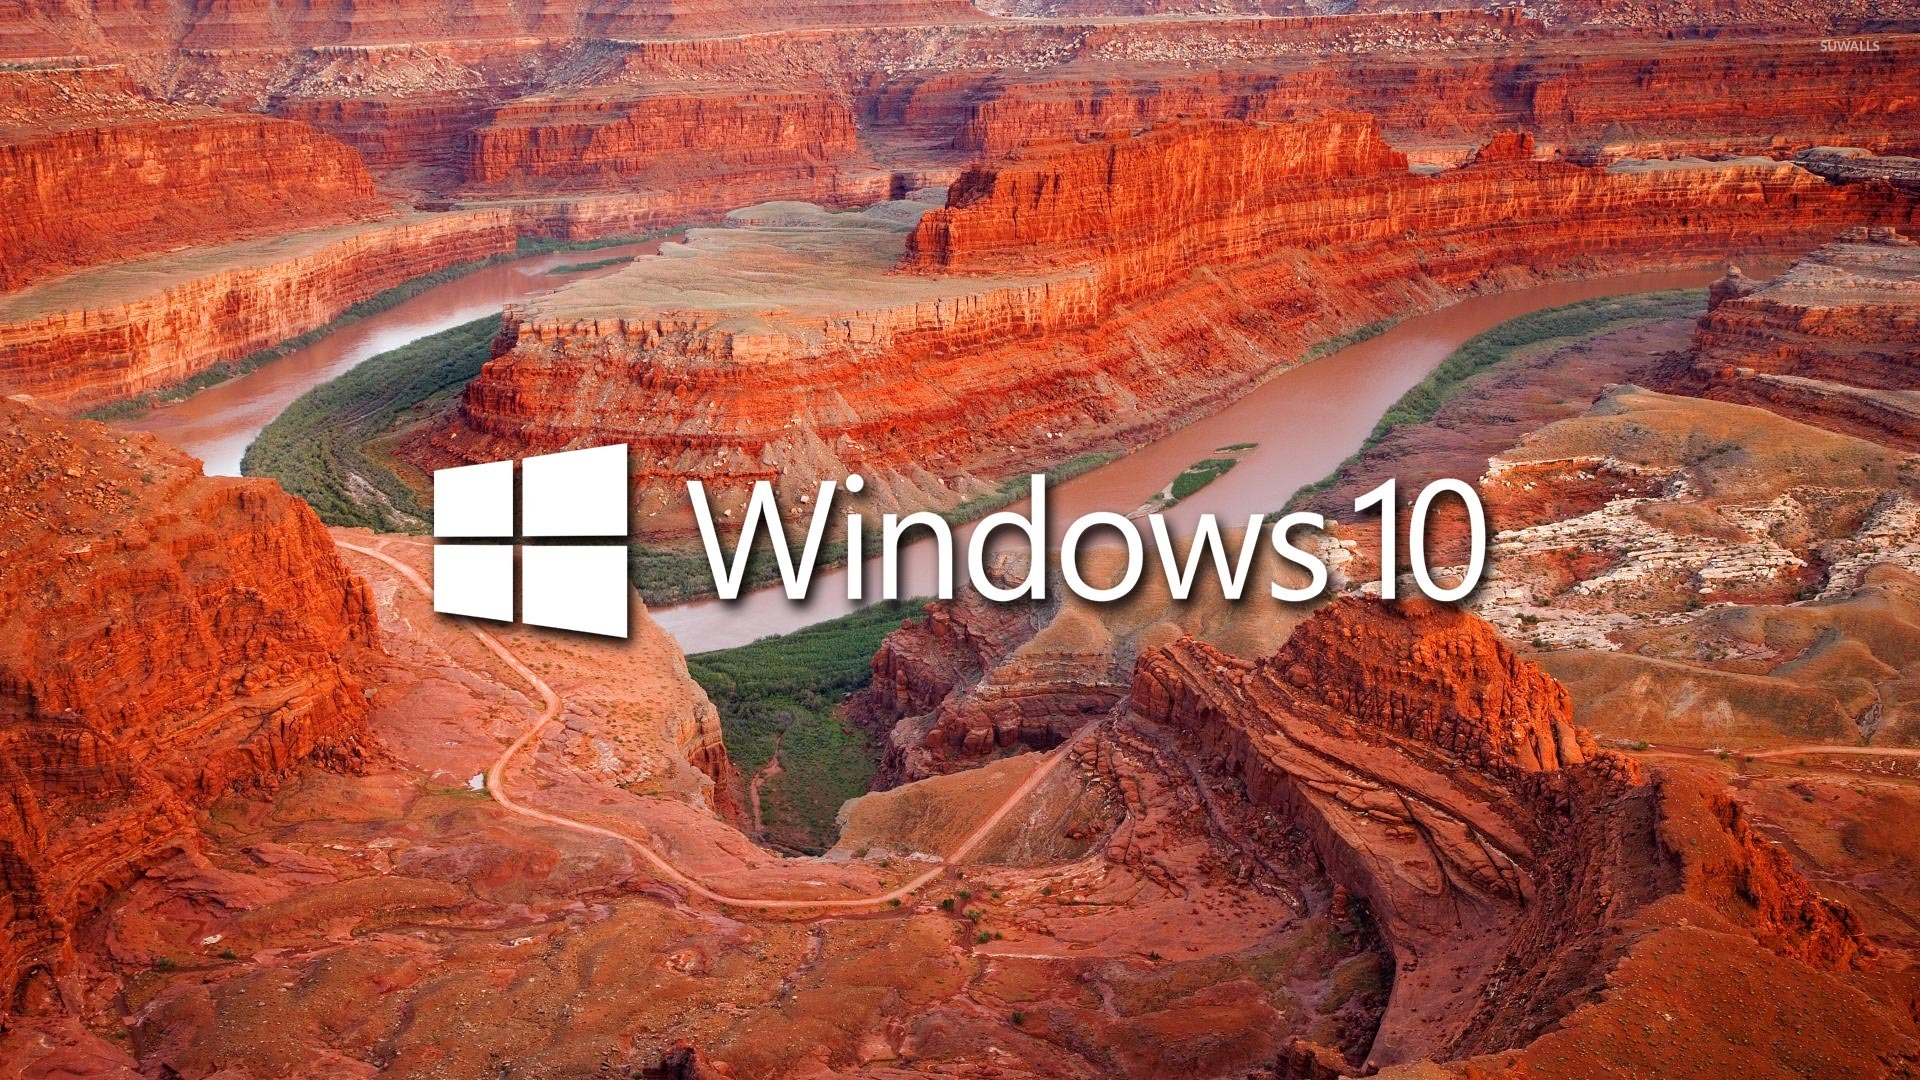 Windows 10 in the canyon white text logo wallpaper - Computer wallpapers -  #46817